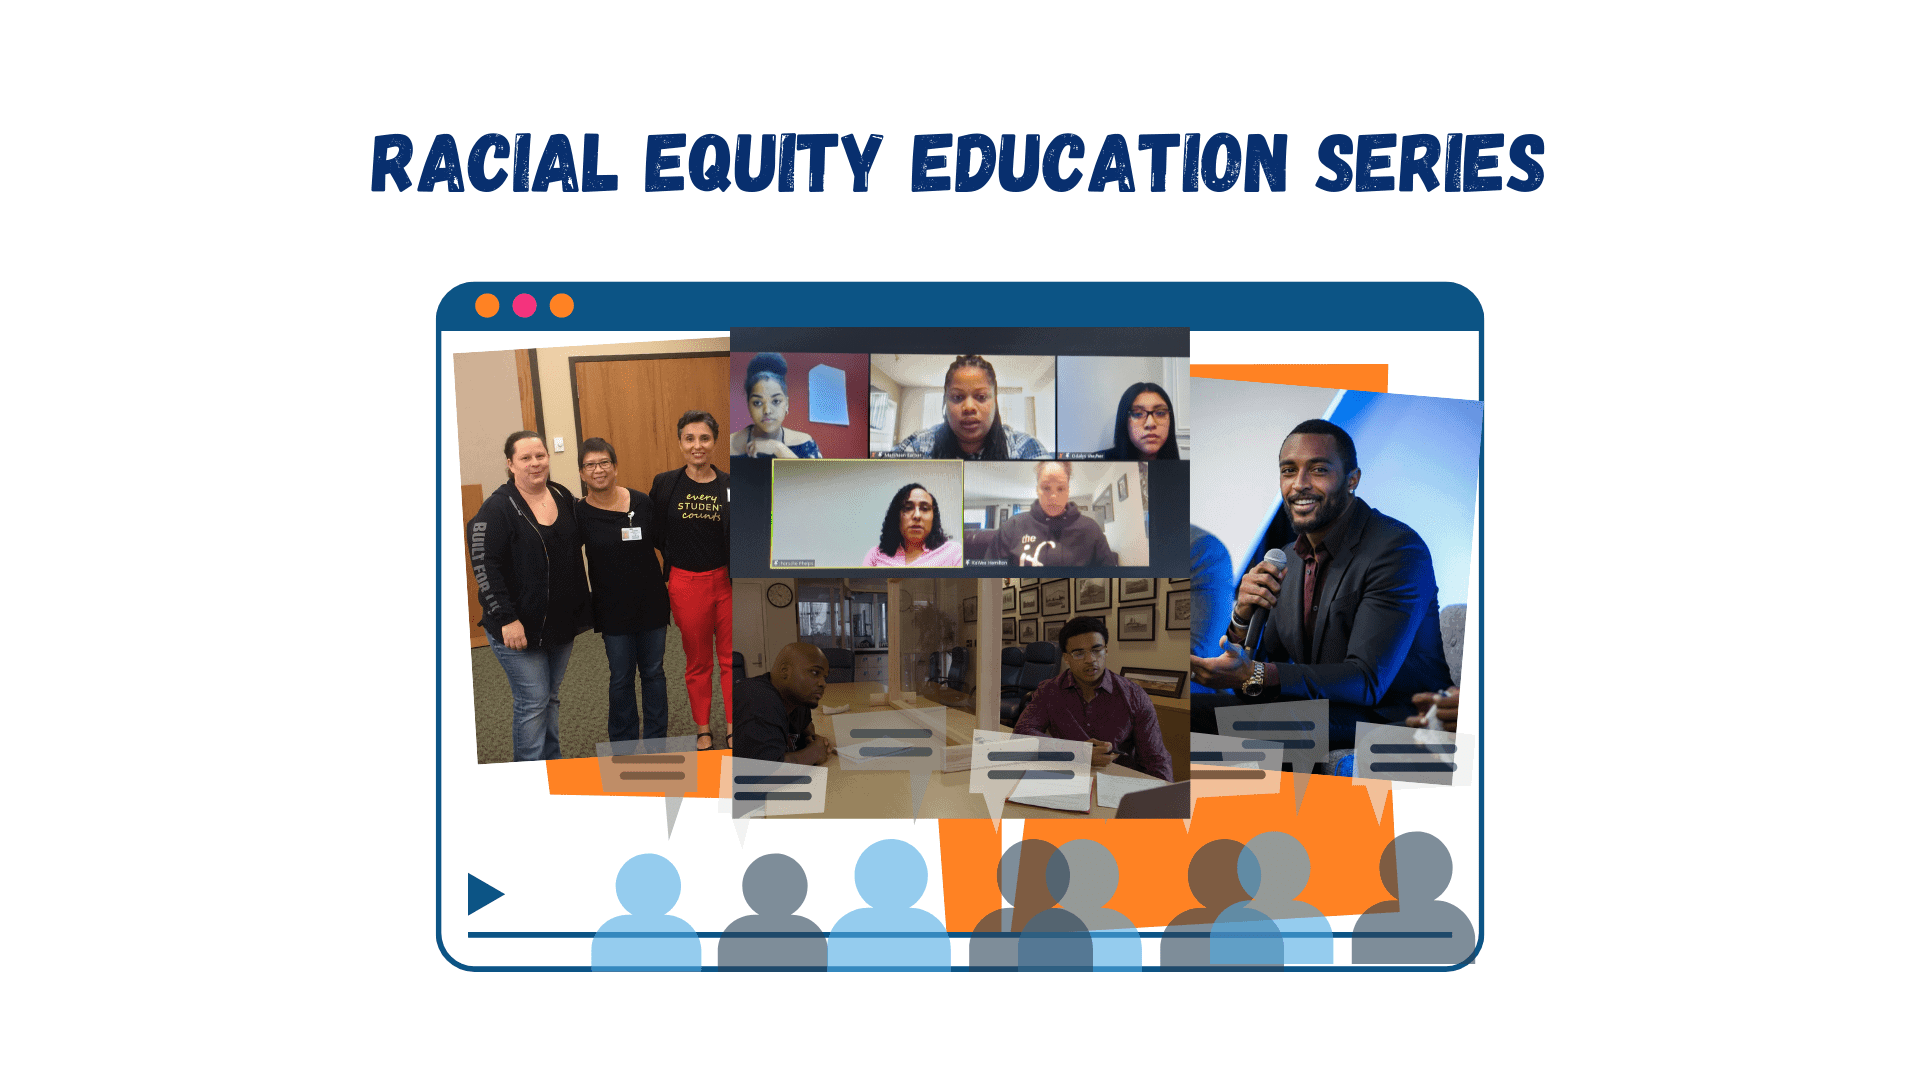 Race Equity Education Series